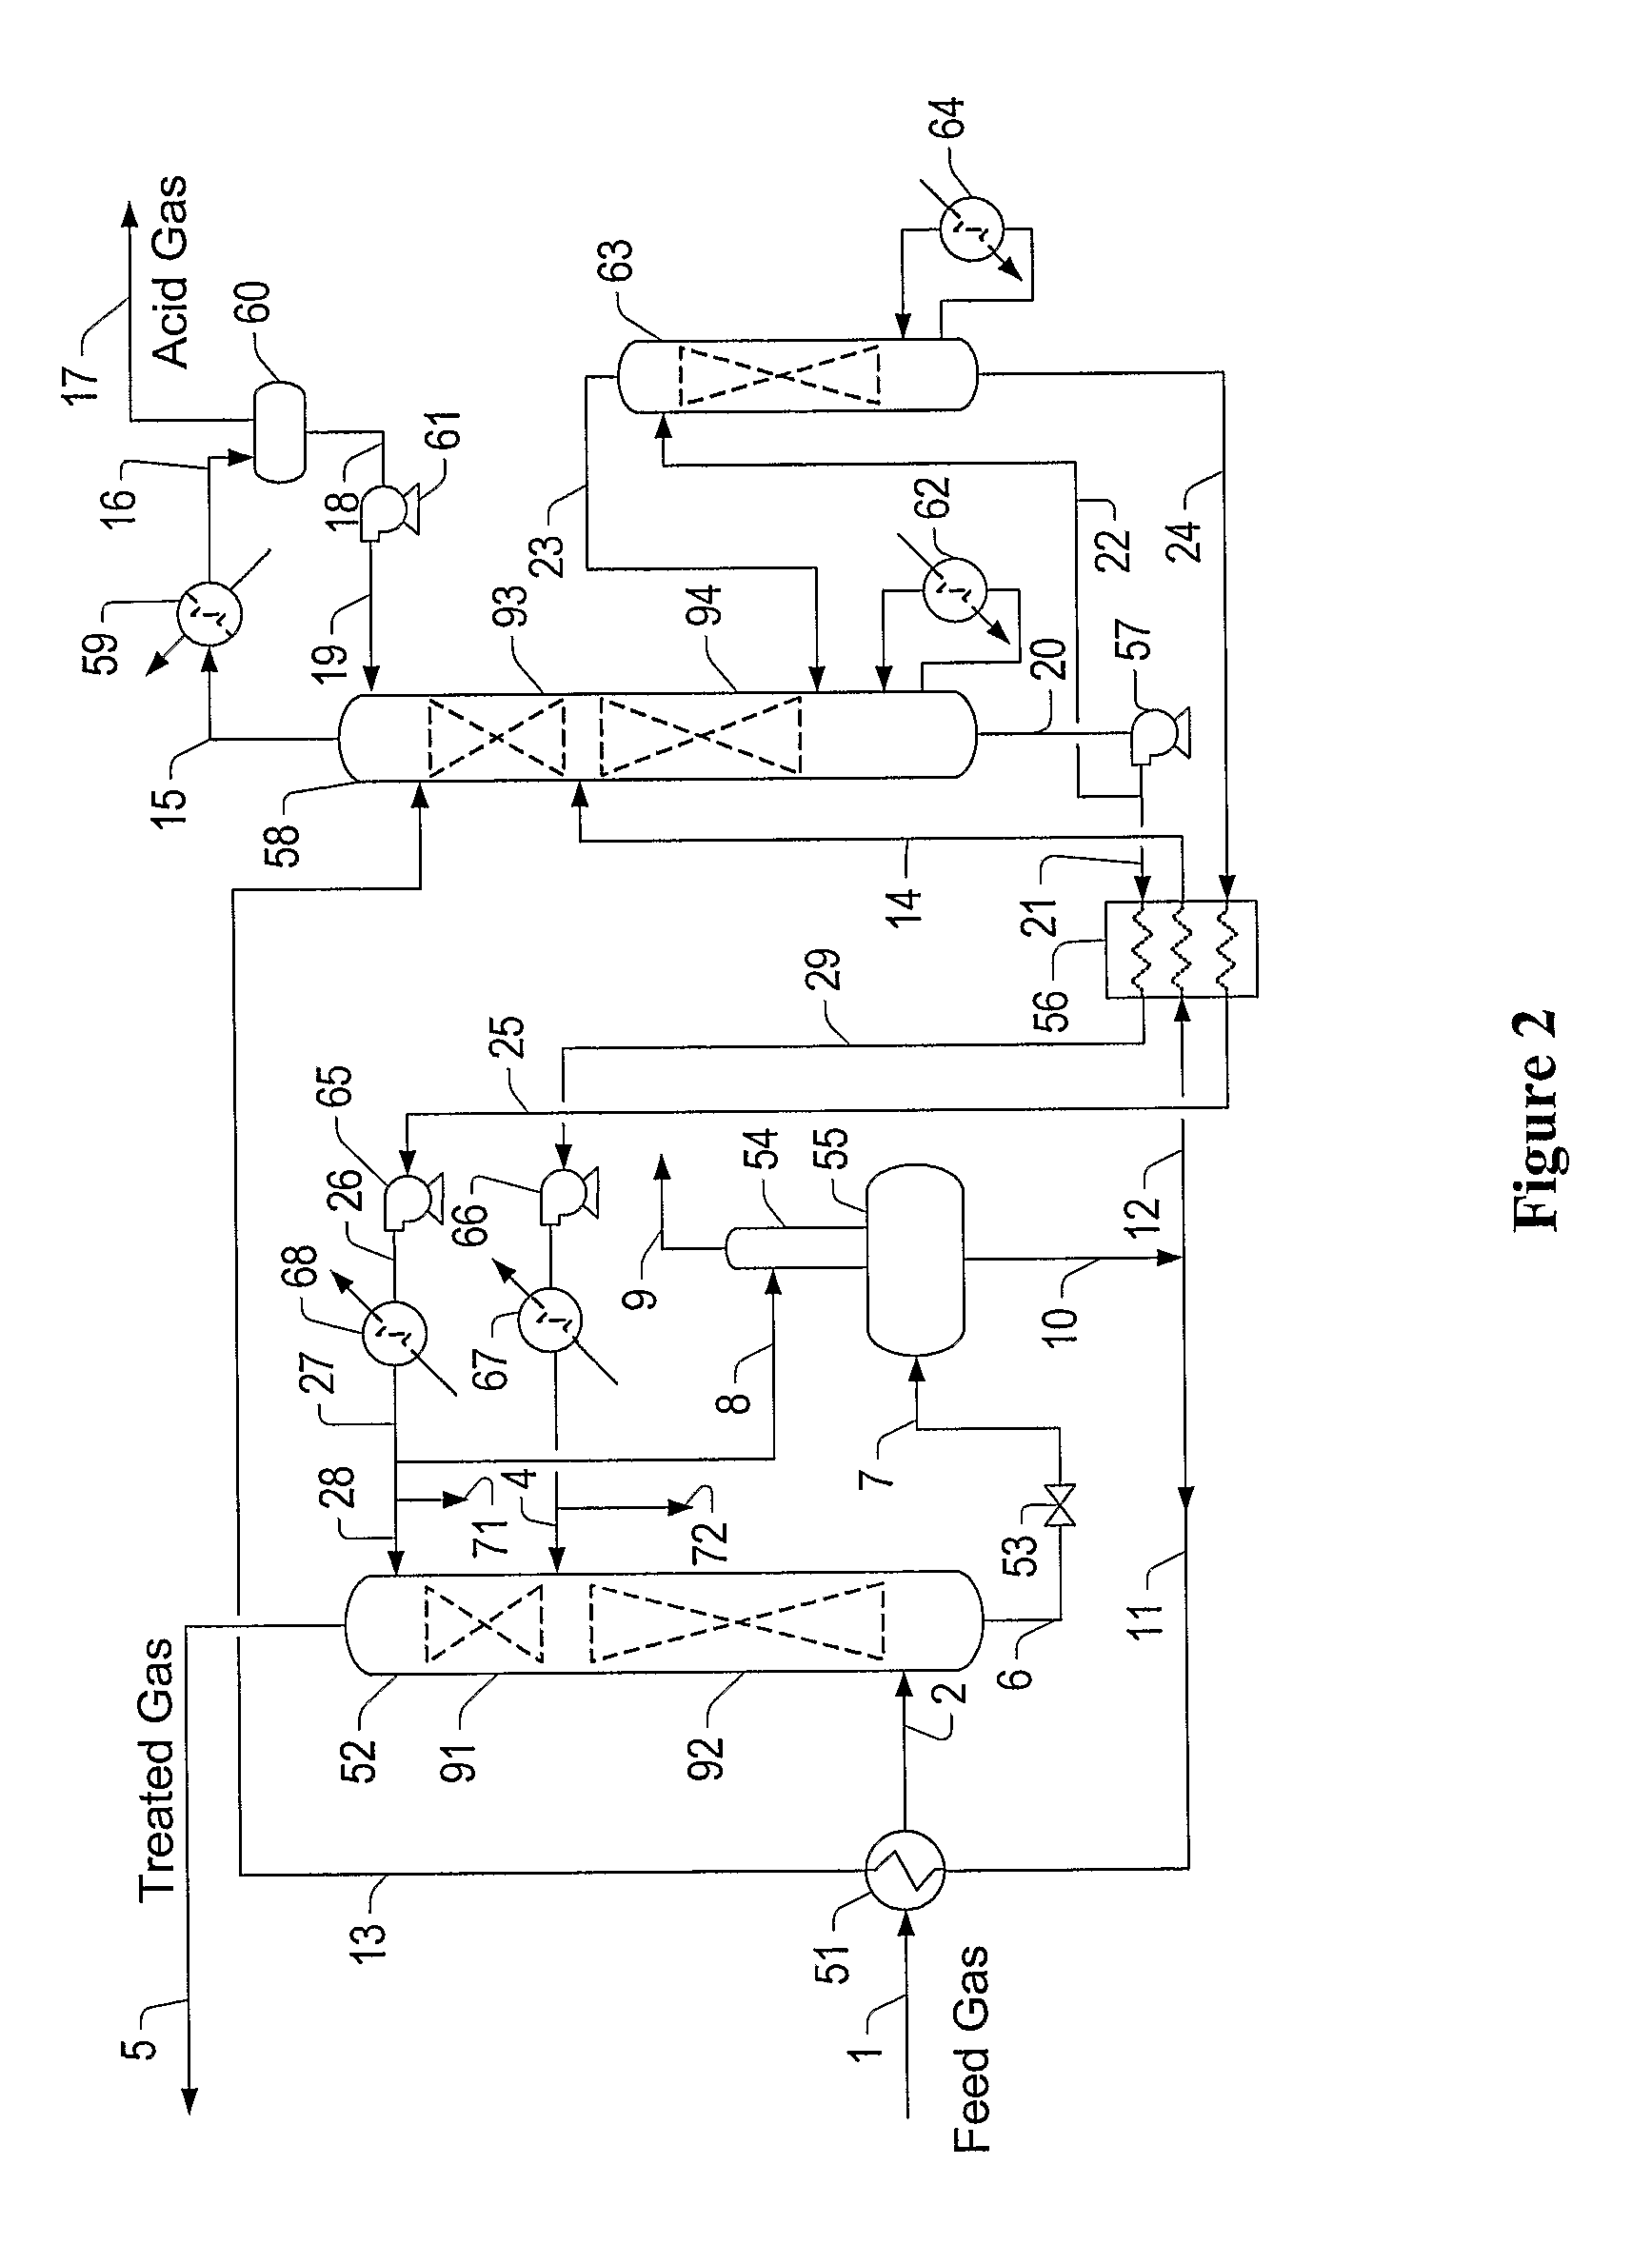 Configurations and Methods for Acid Gas Absorption and Solvent Regeneration